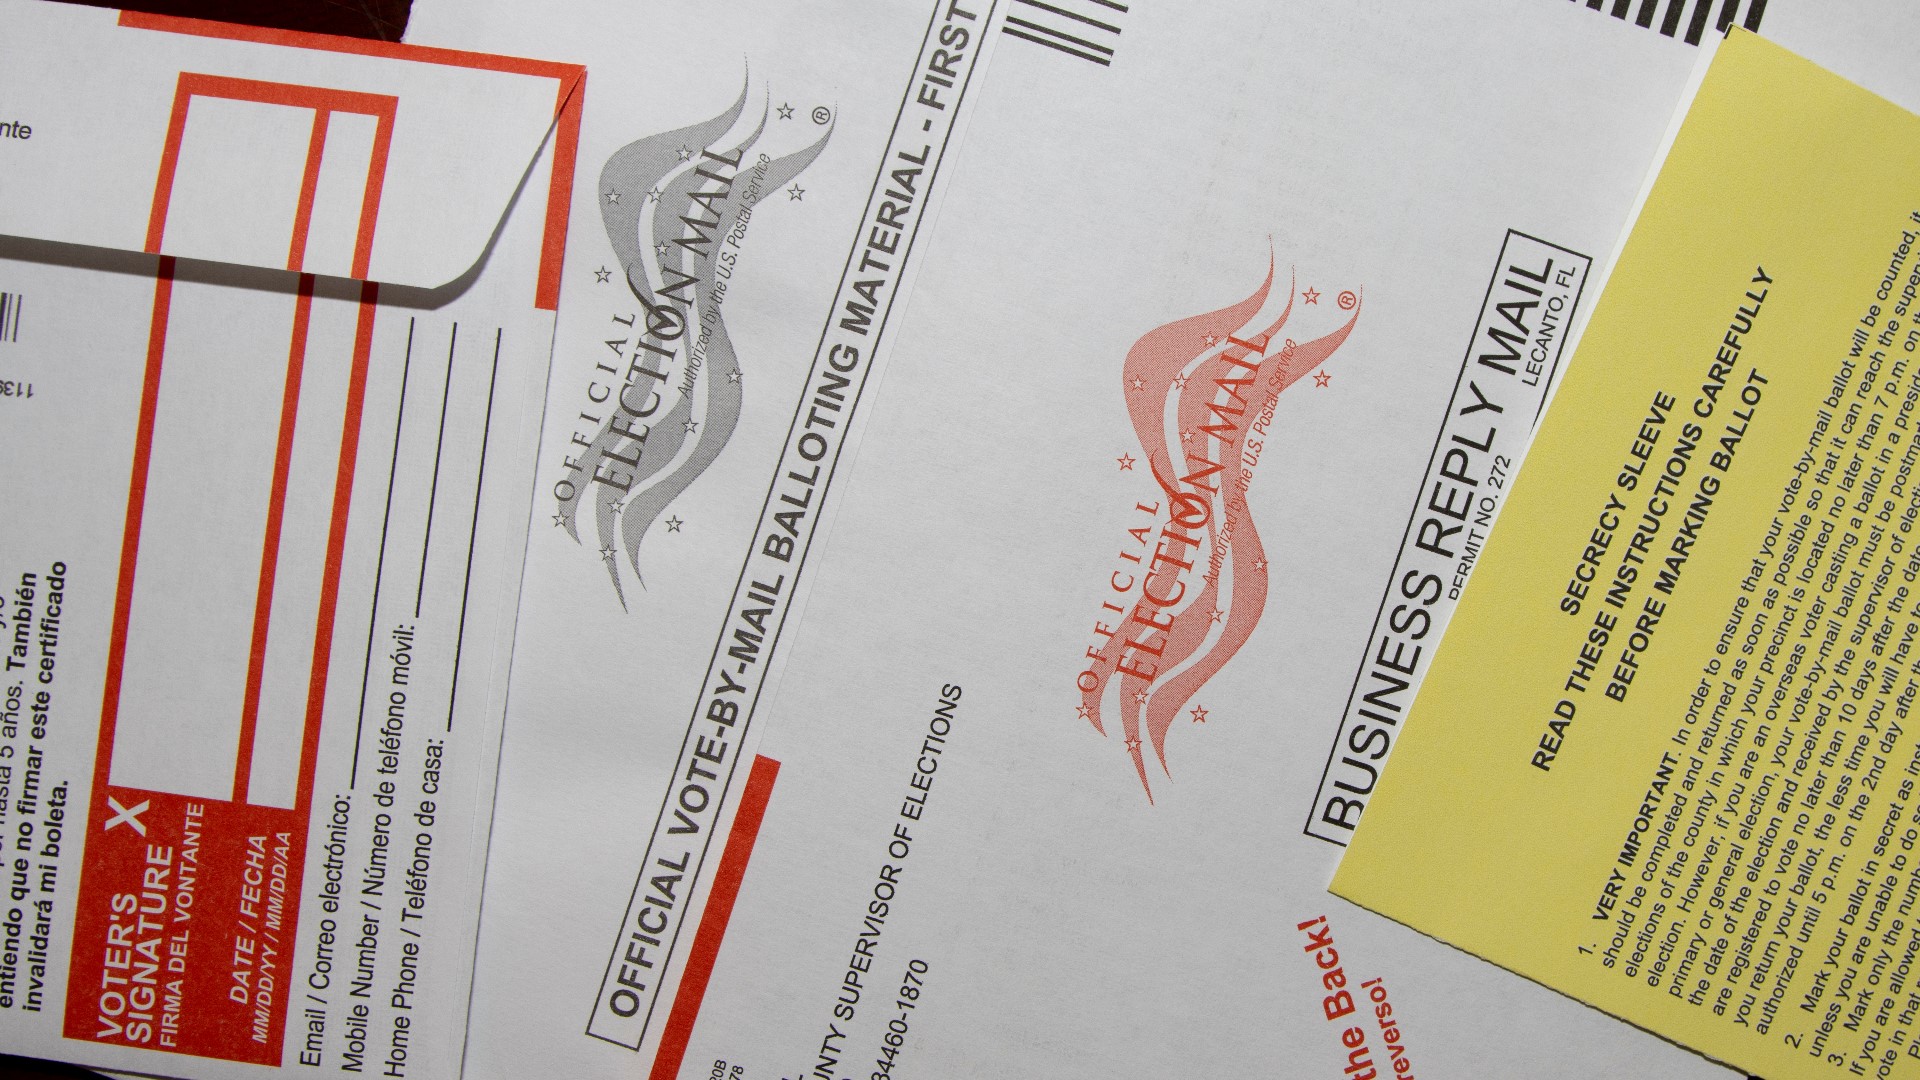 Jon Meyer takes a look at how voter registration numbers have changed.